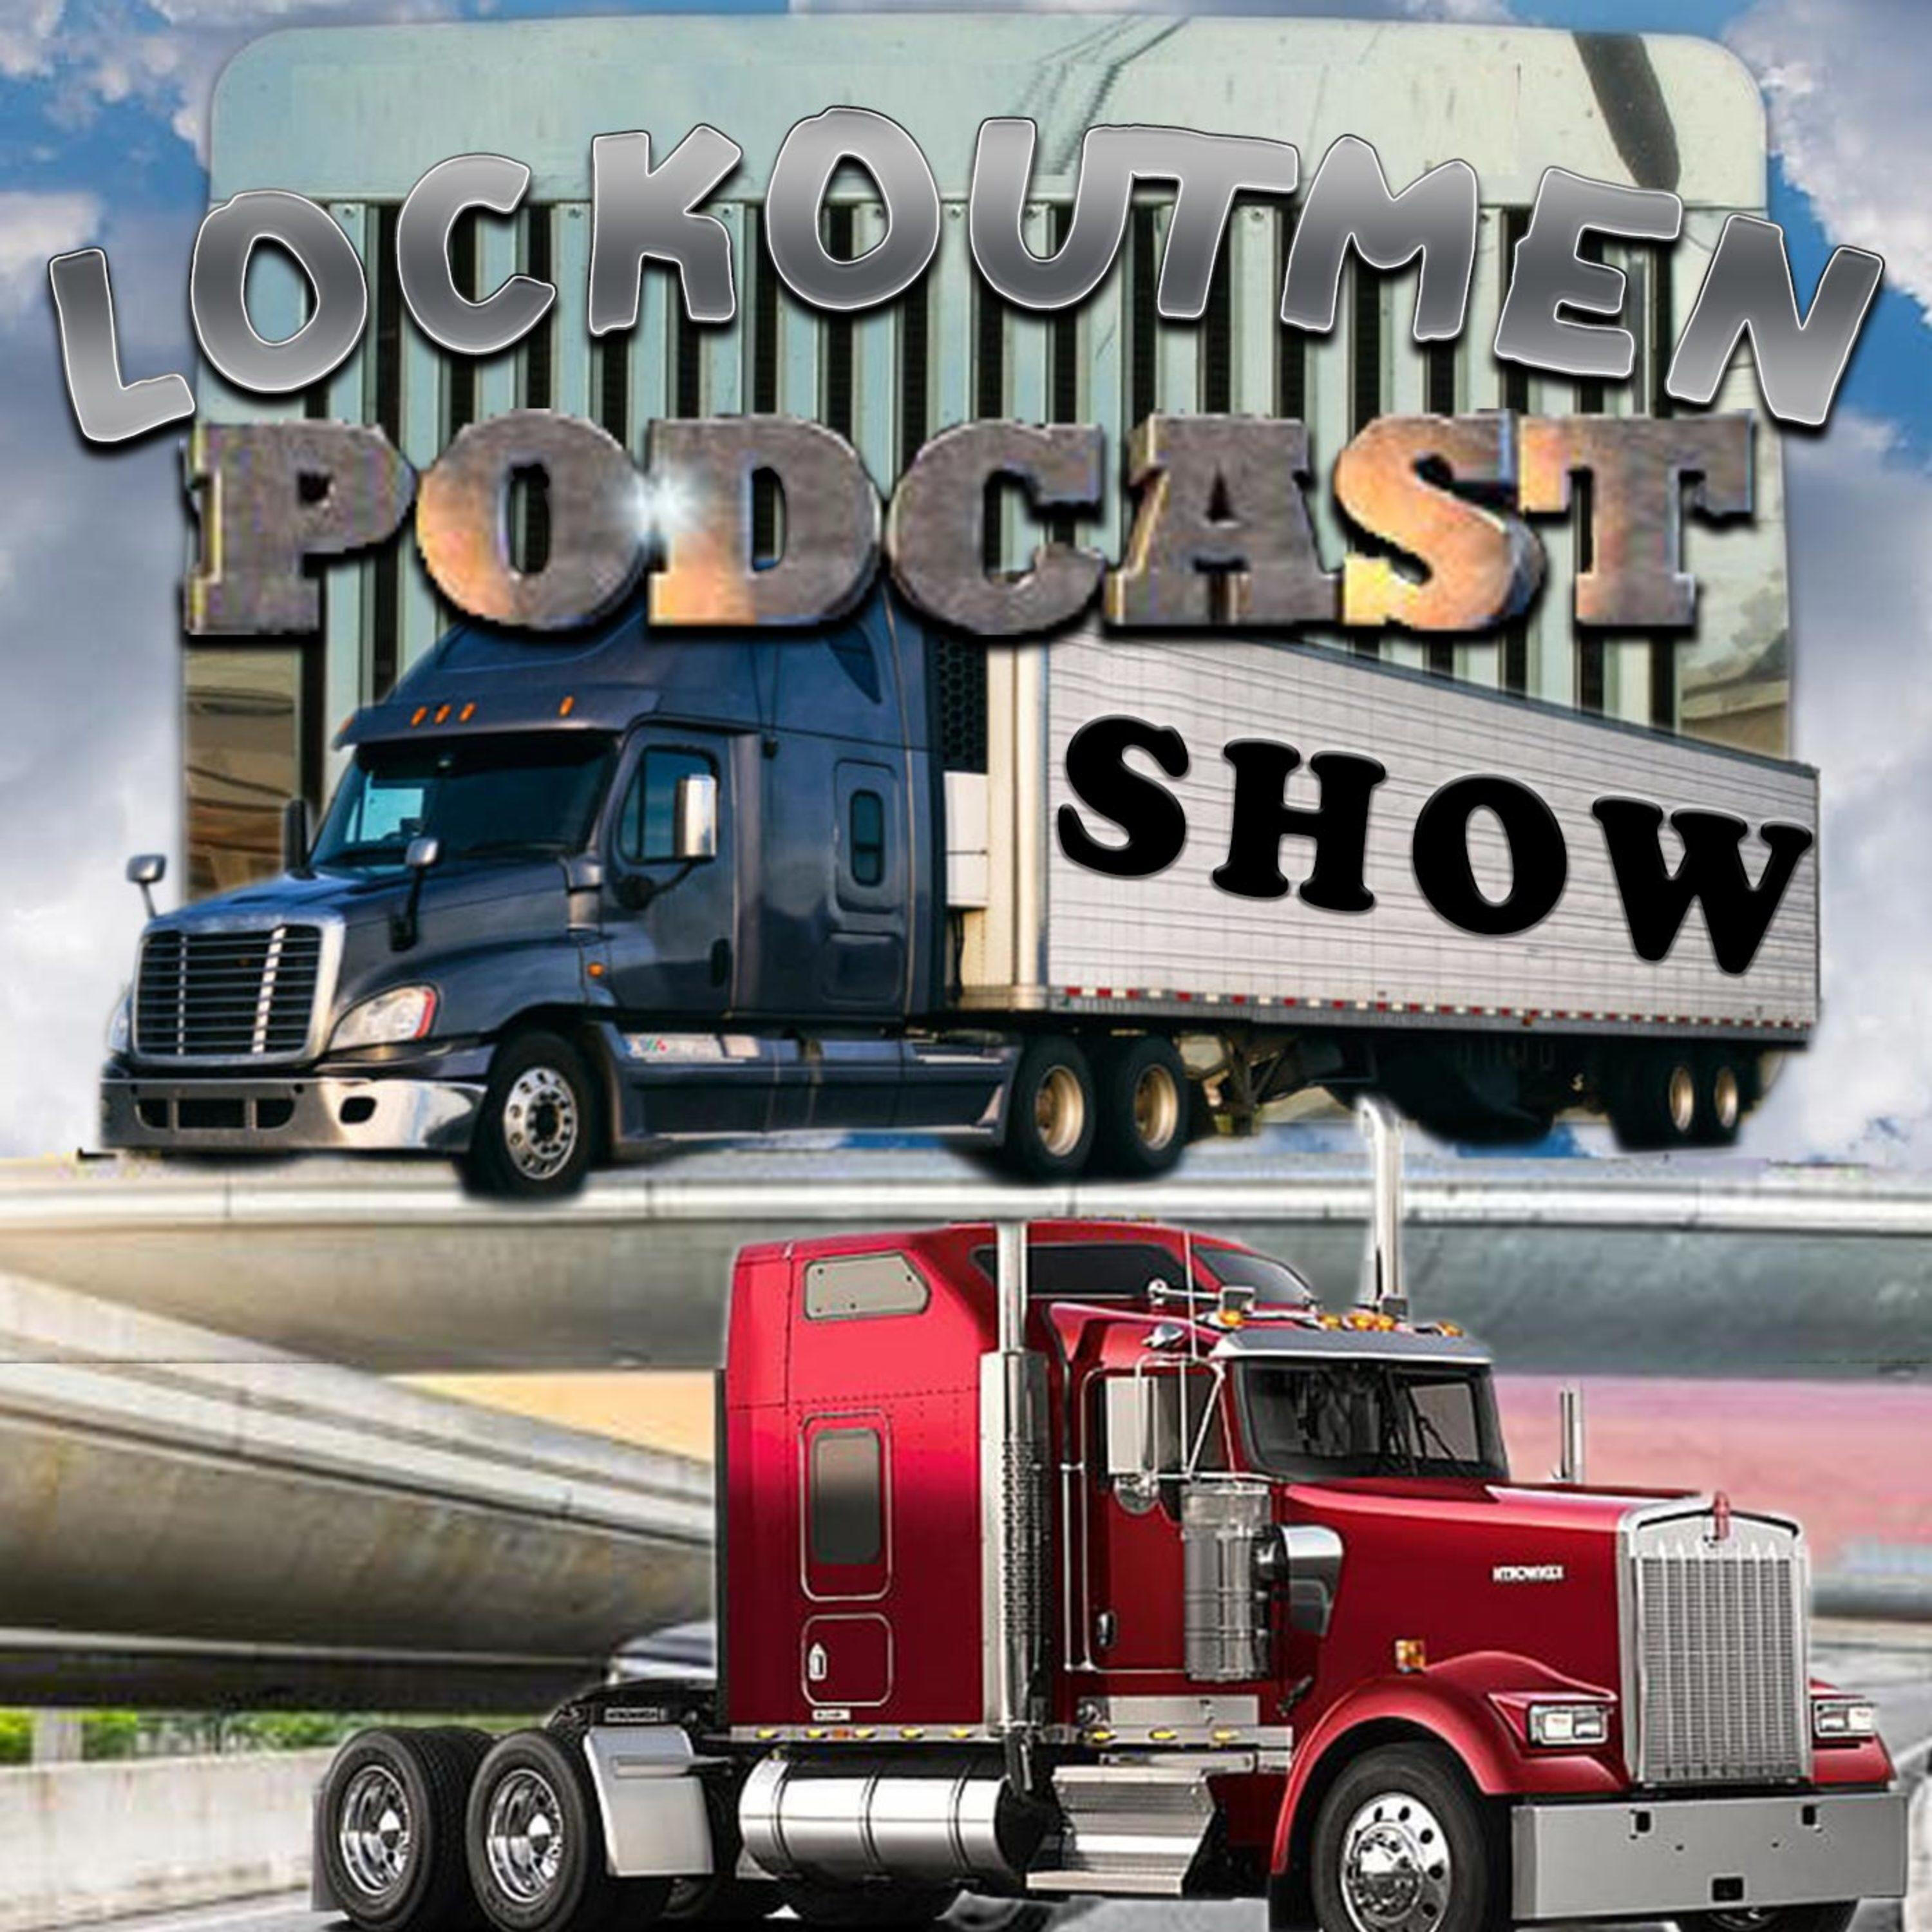 Mother Truckers In Porn Stars - Lockoutmen Podcast Show - The Truckers Podcast | iHeartRadio